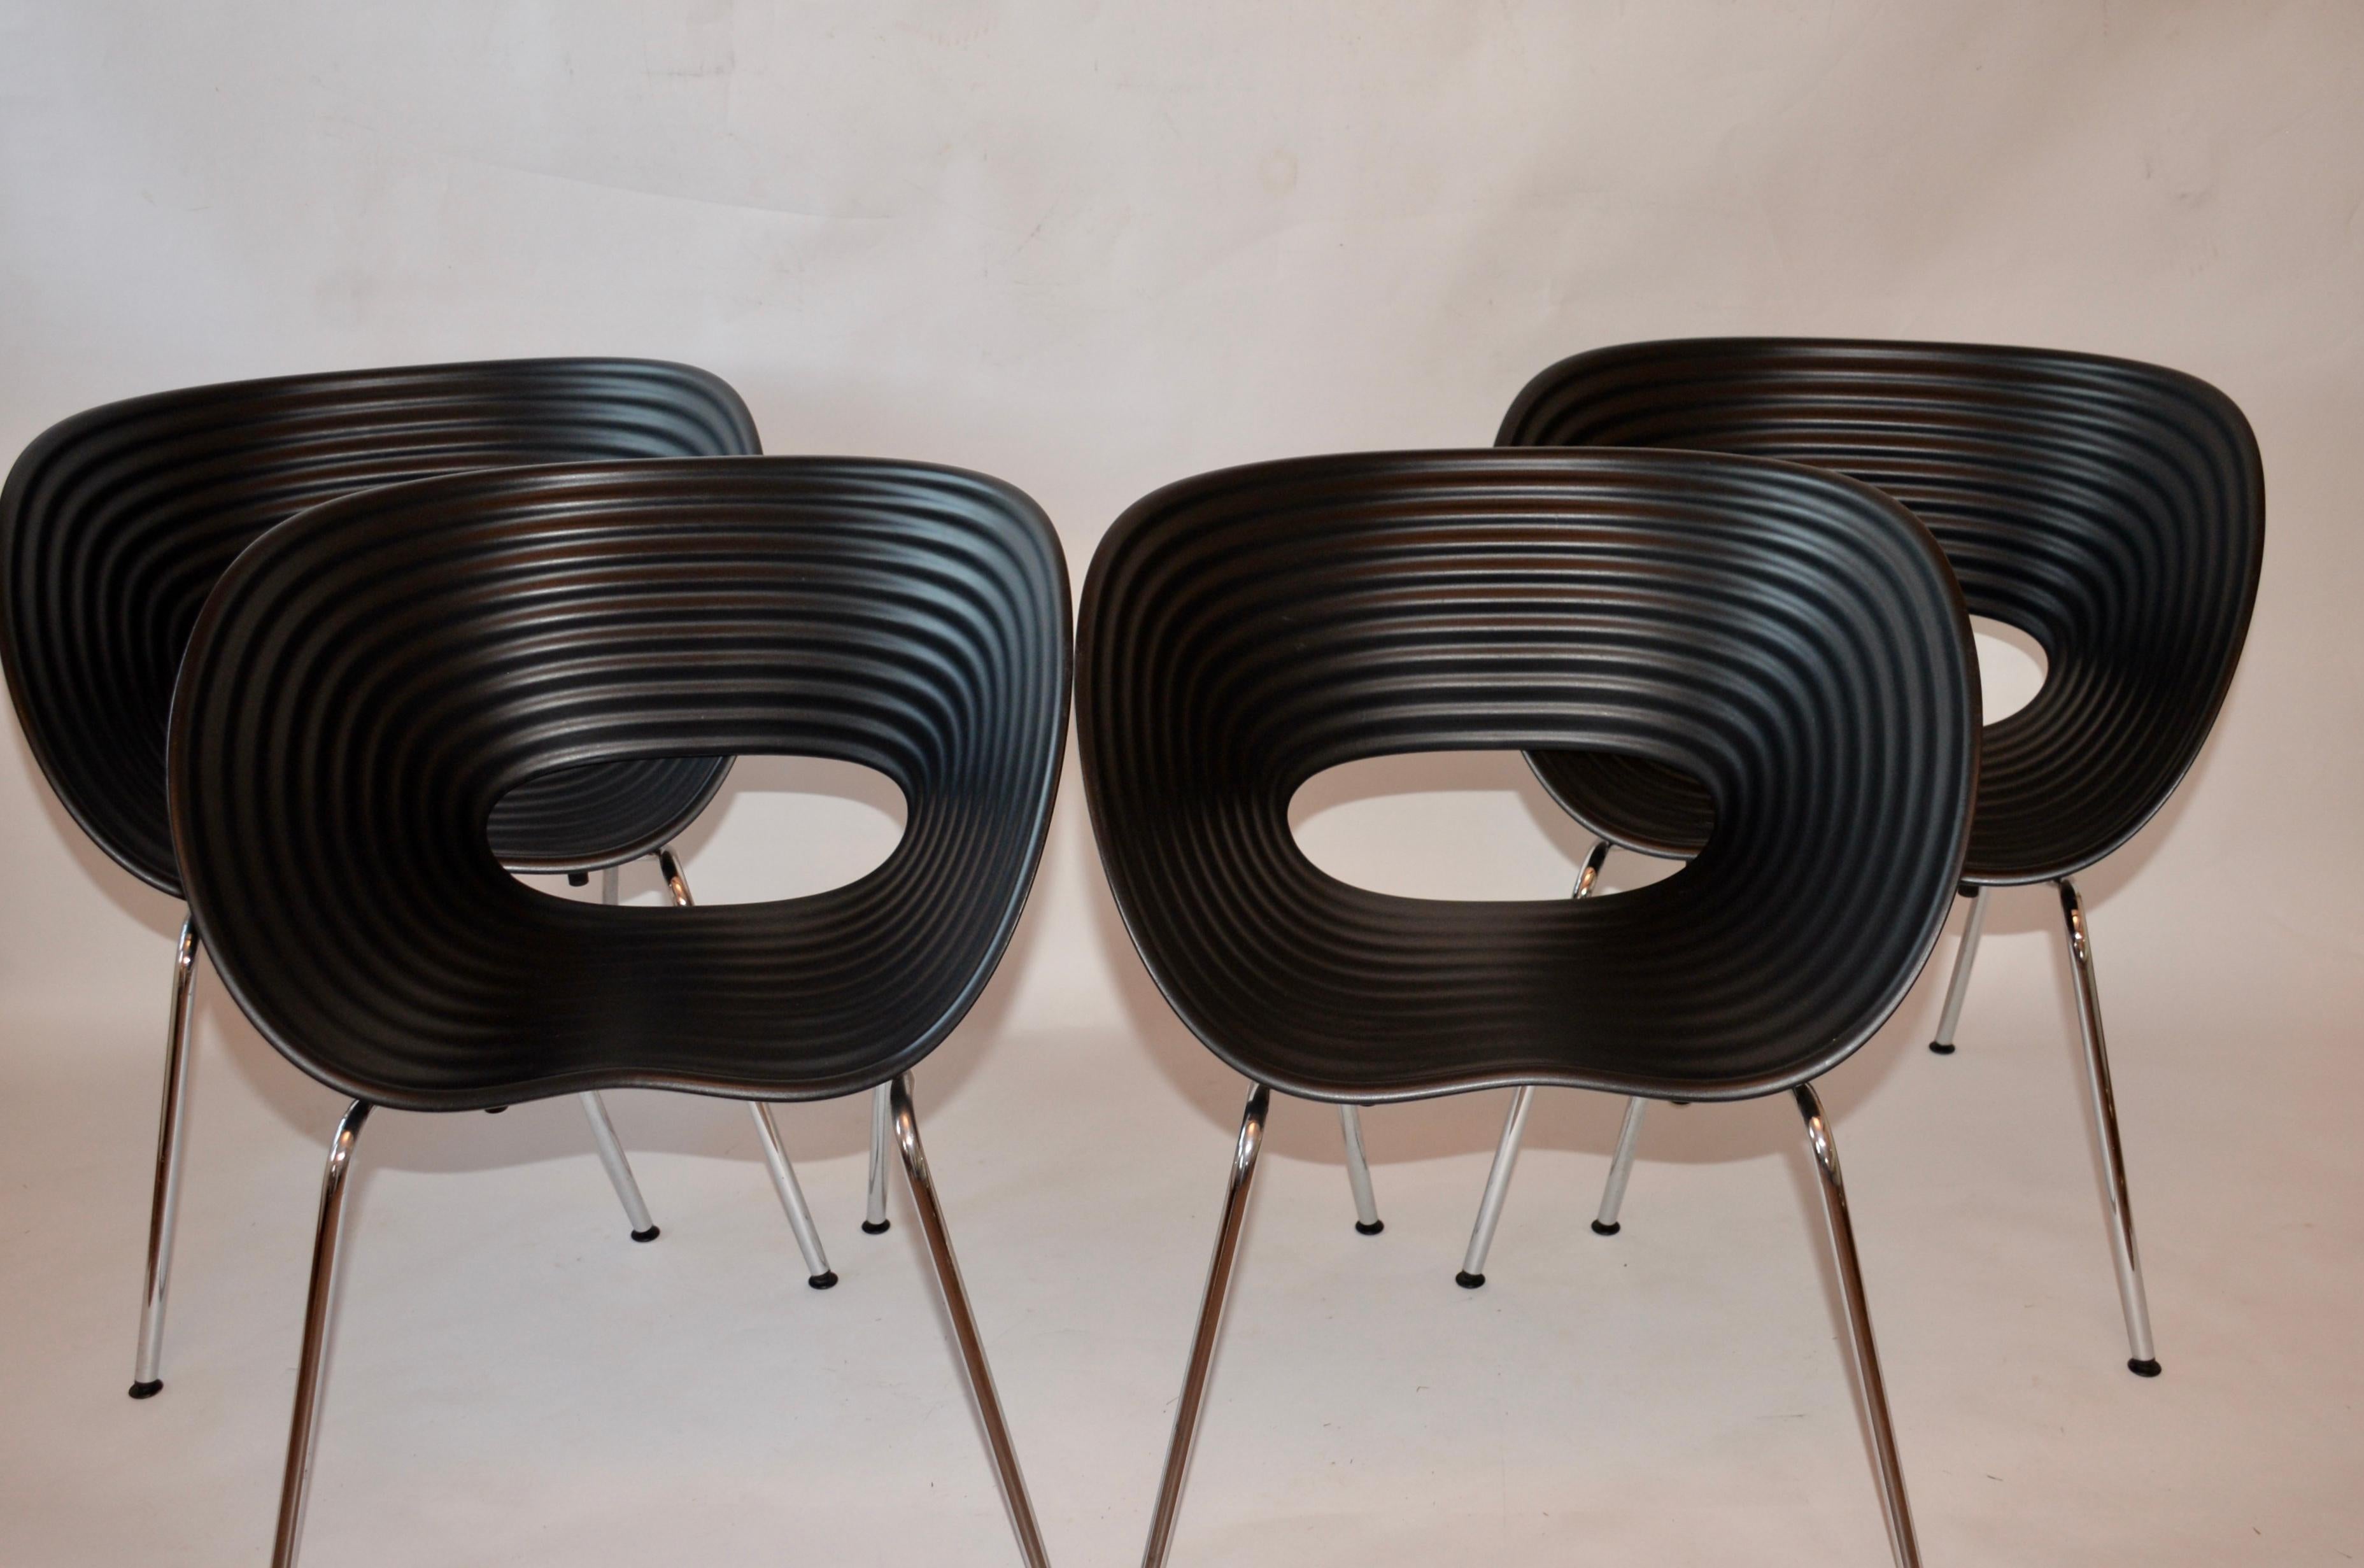 Four iconic Tom Vac chairs by Ron Arad in black. The moulded polypropylene shell offers comfortable seating and retards fading of the color, so suitable for indoor and outdoor use, chrome-plated base and genuine labels to verify the manufacturer as